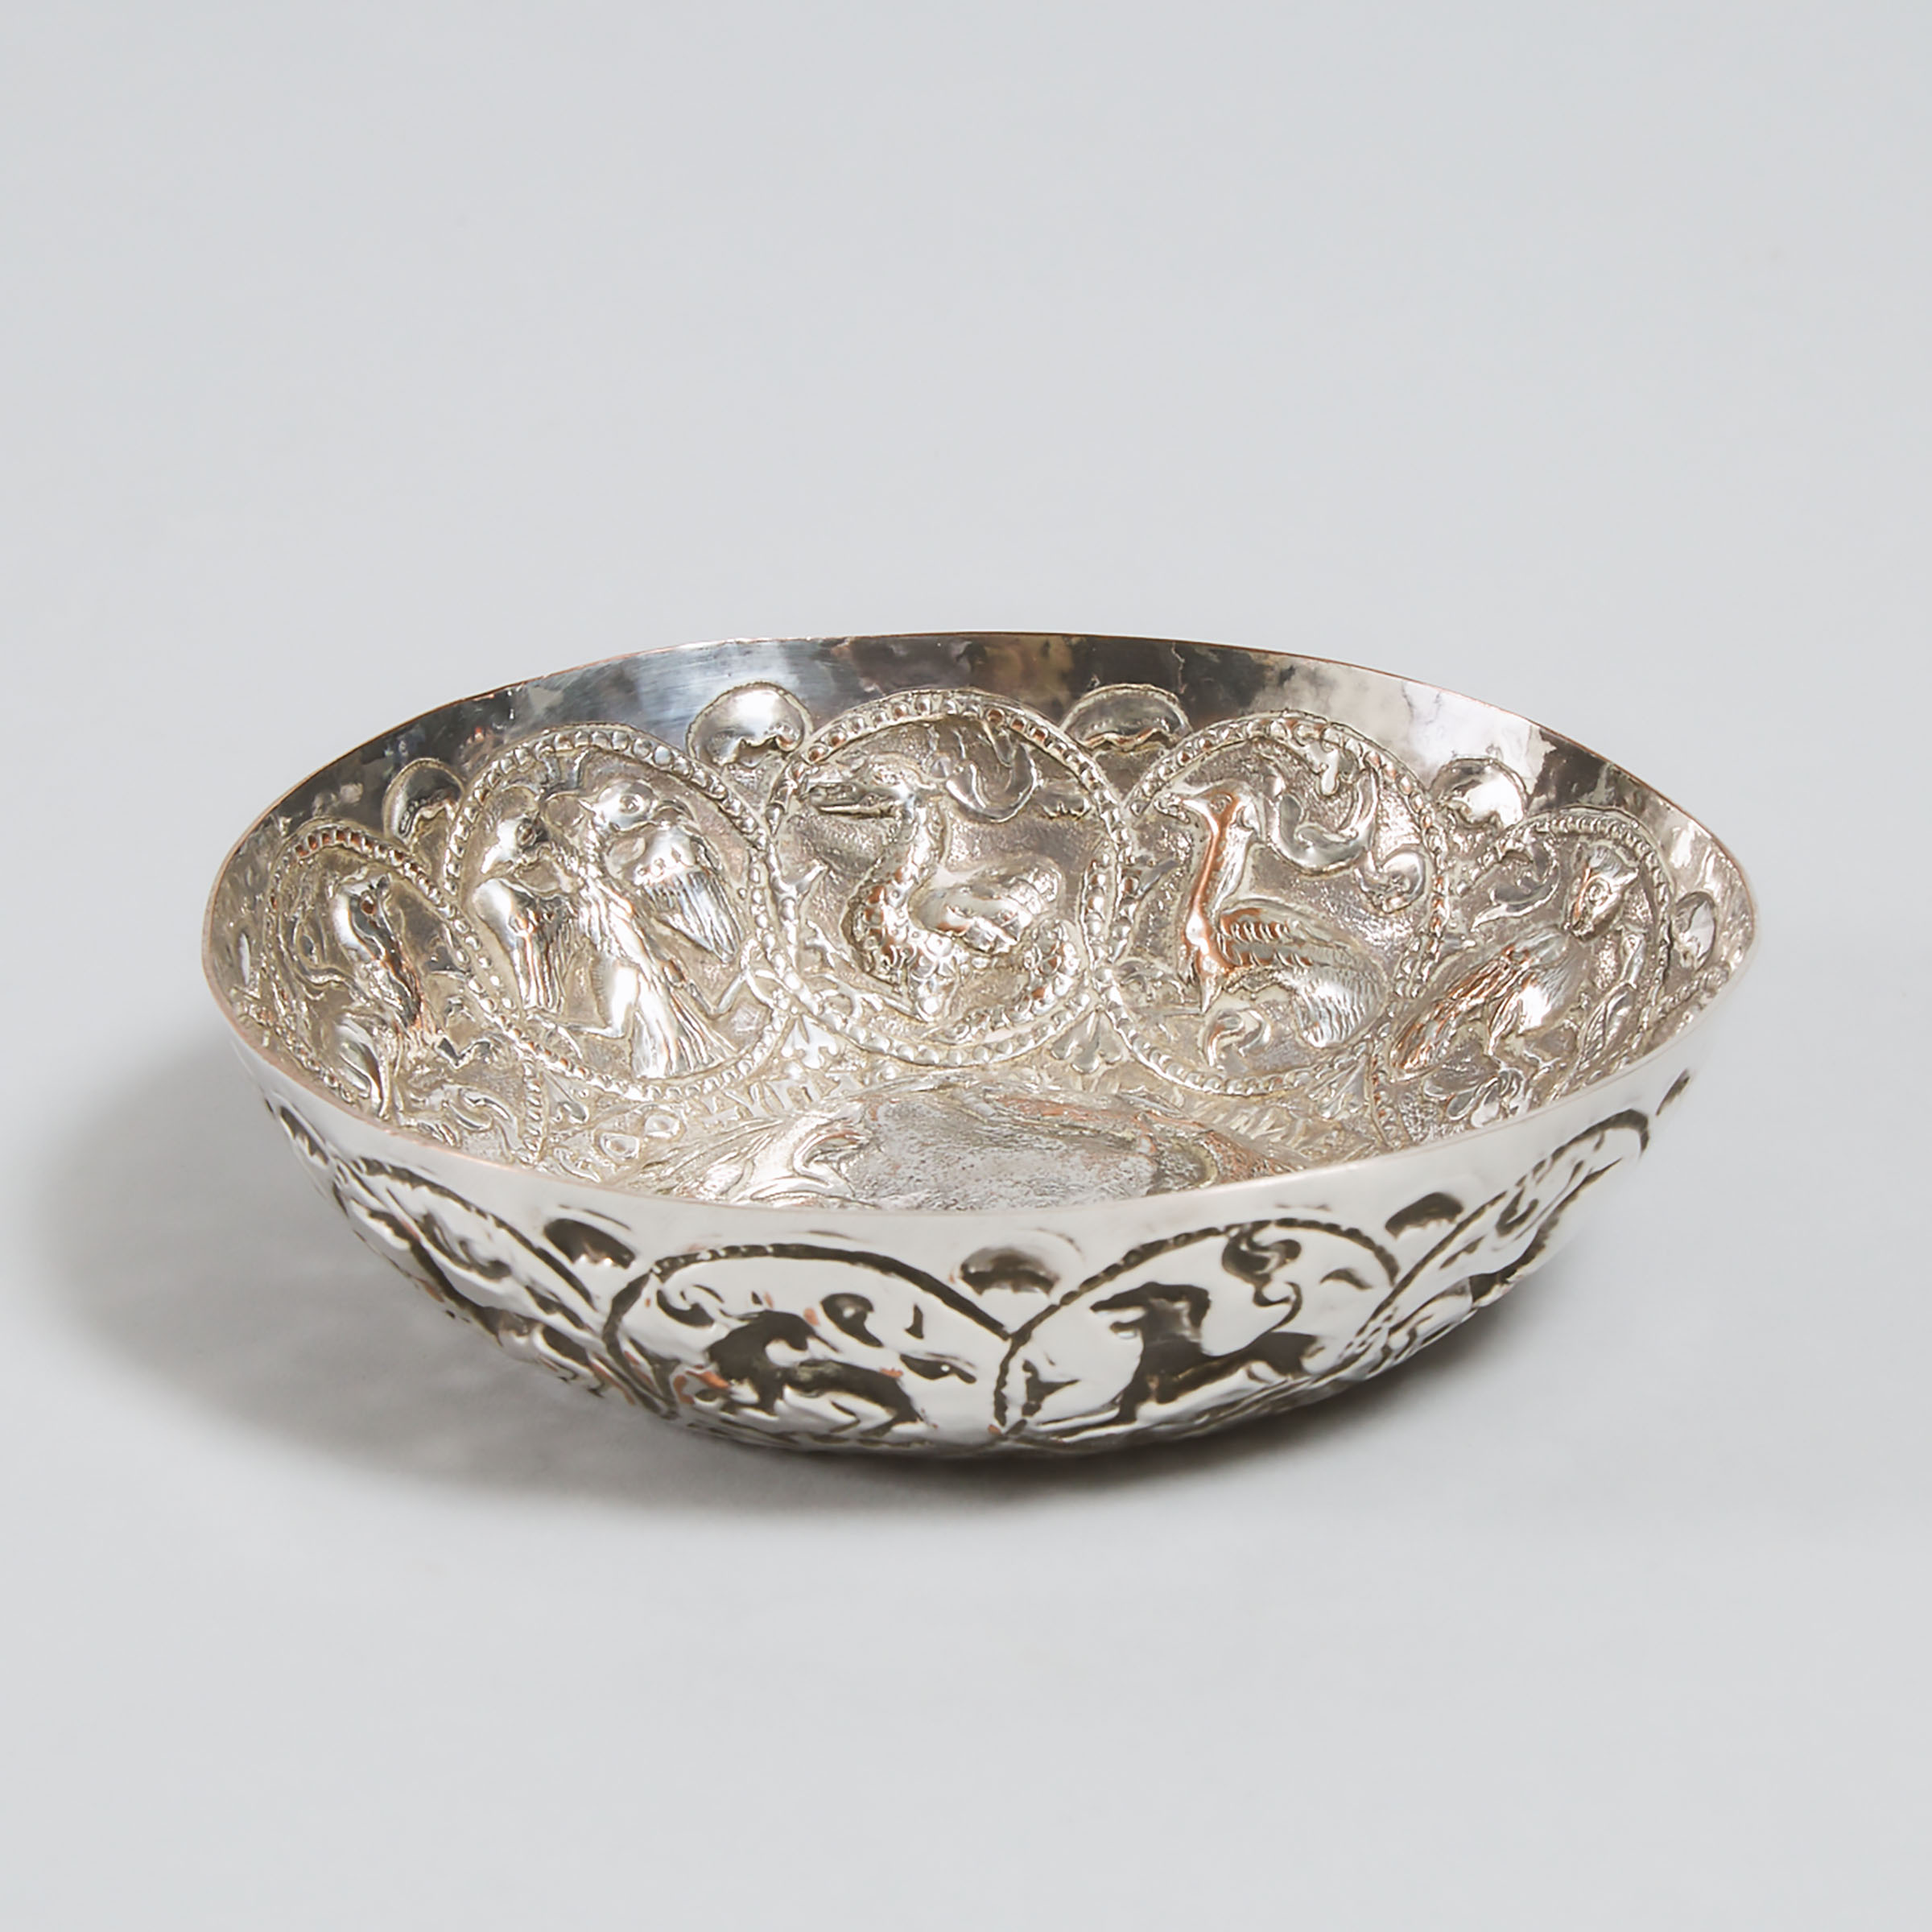 Balkan or Cypriot Ottoman Silvered Copper Wine Bowl, 18th/19th century 